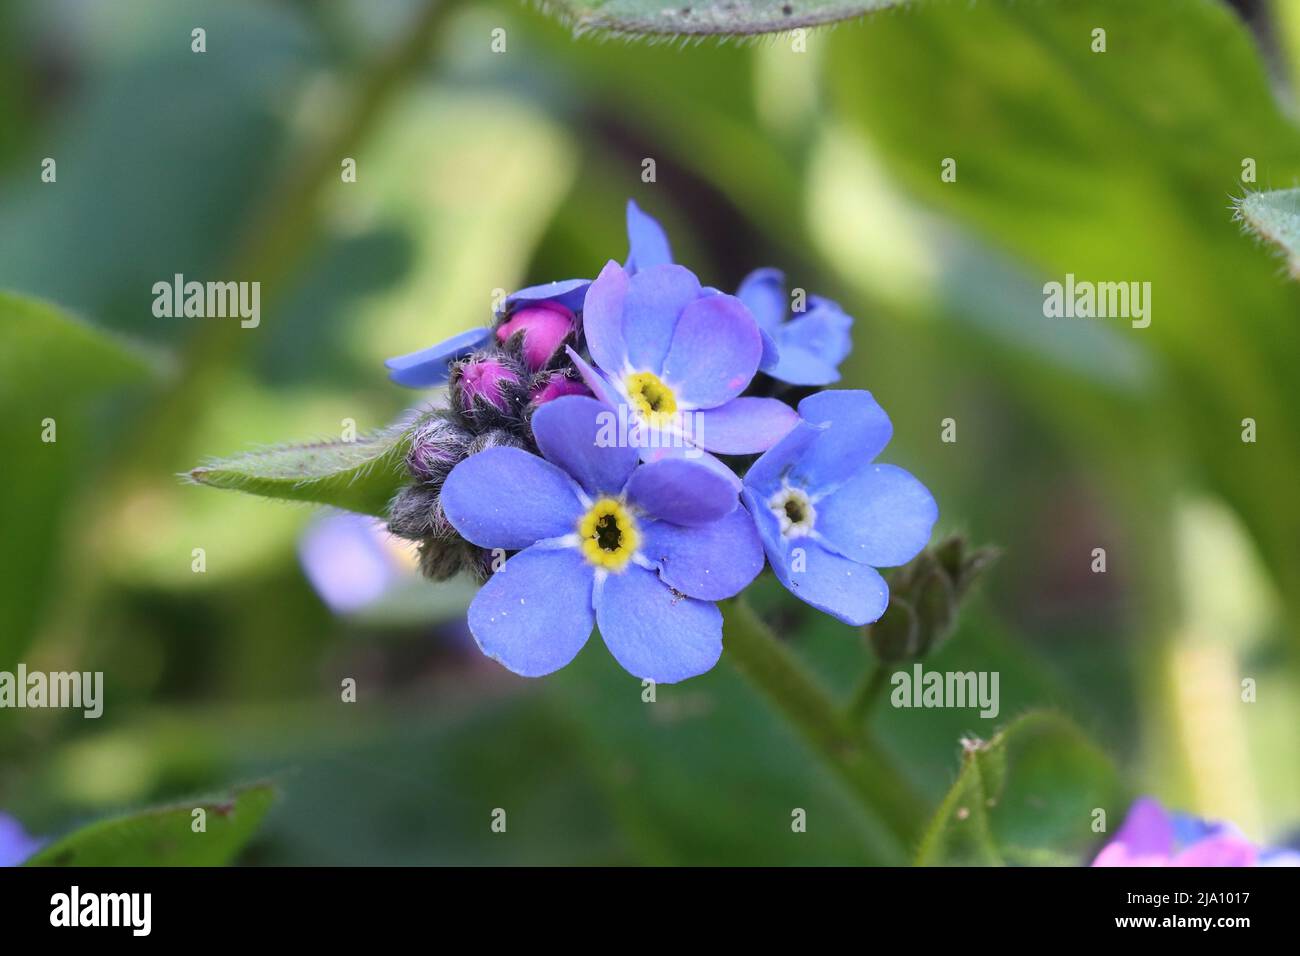 close-up of beautiful blue forget me not flowers against a blurry background Stock Photo